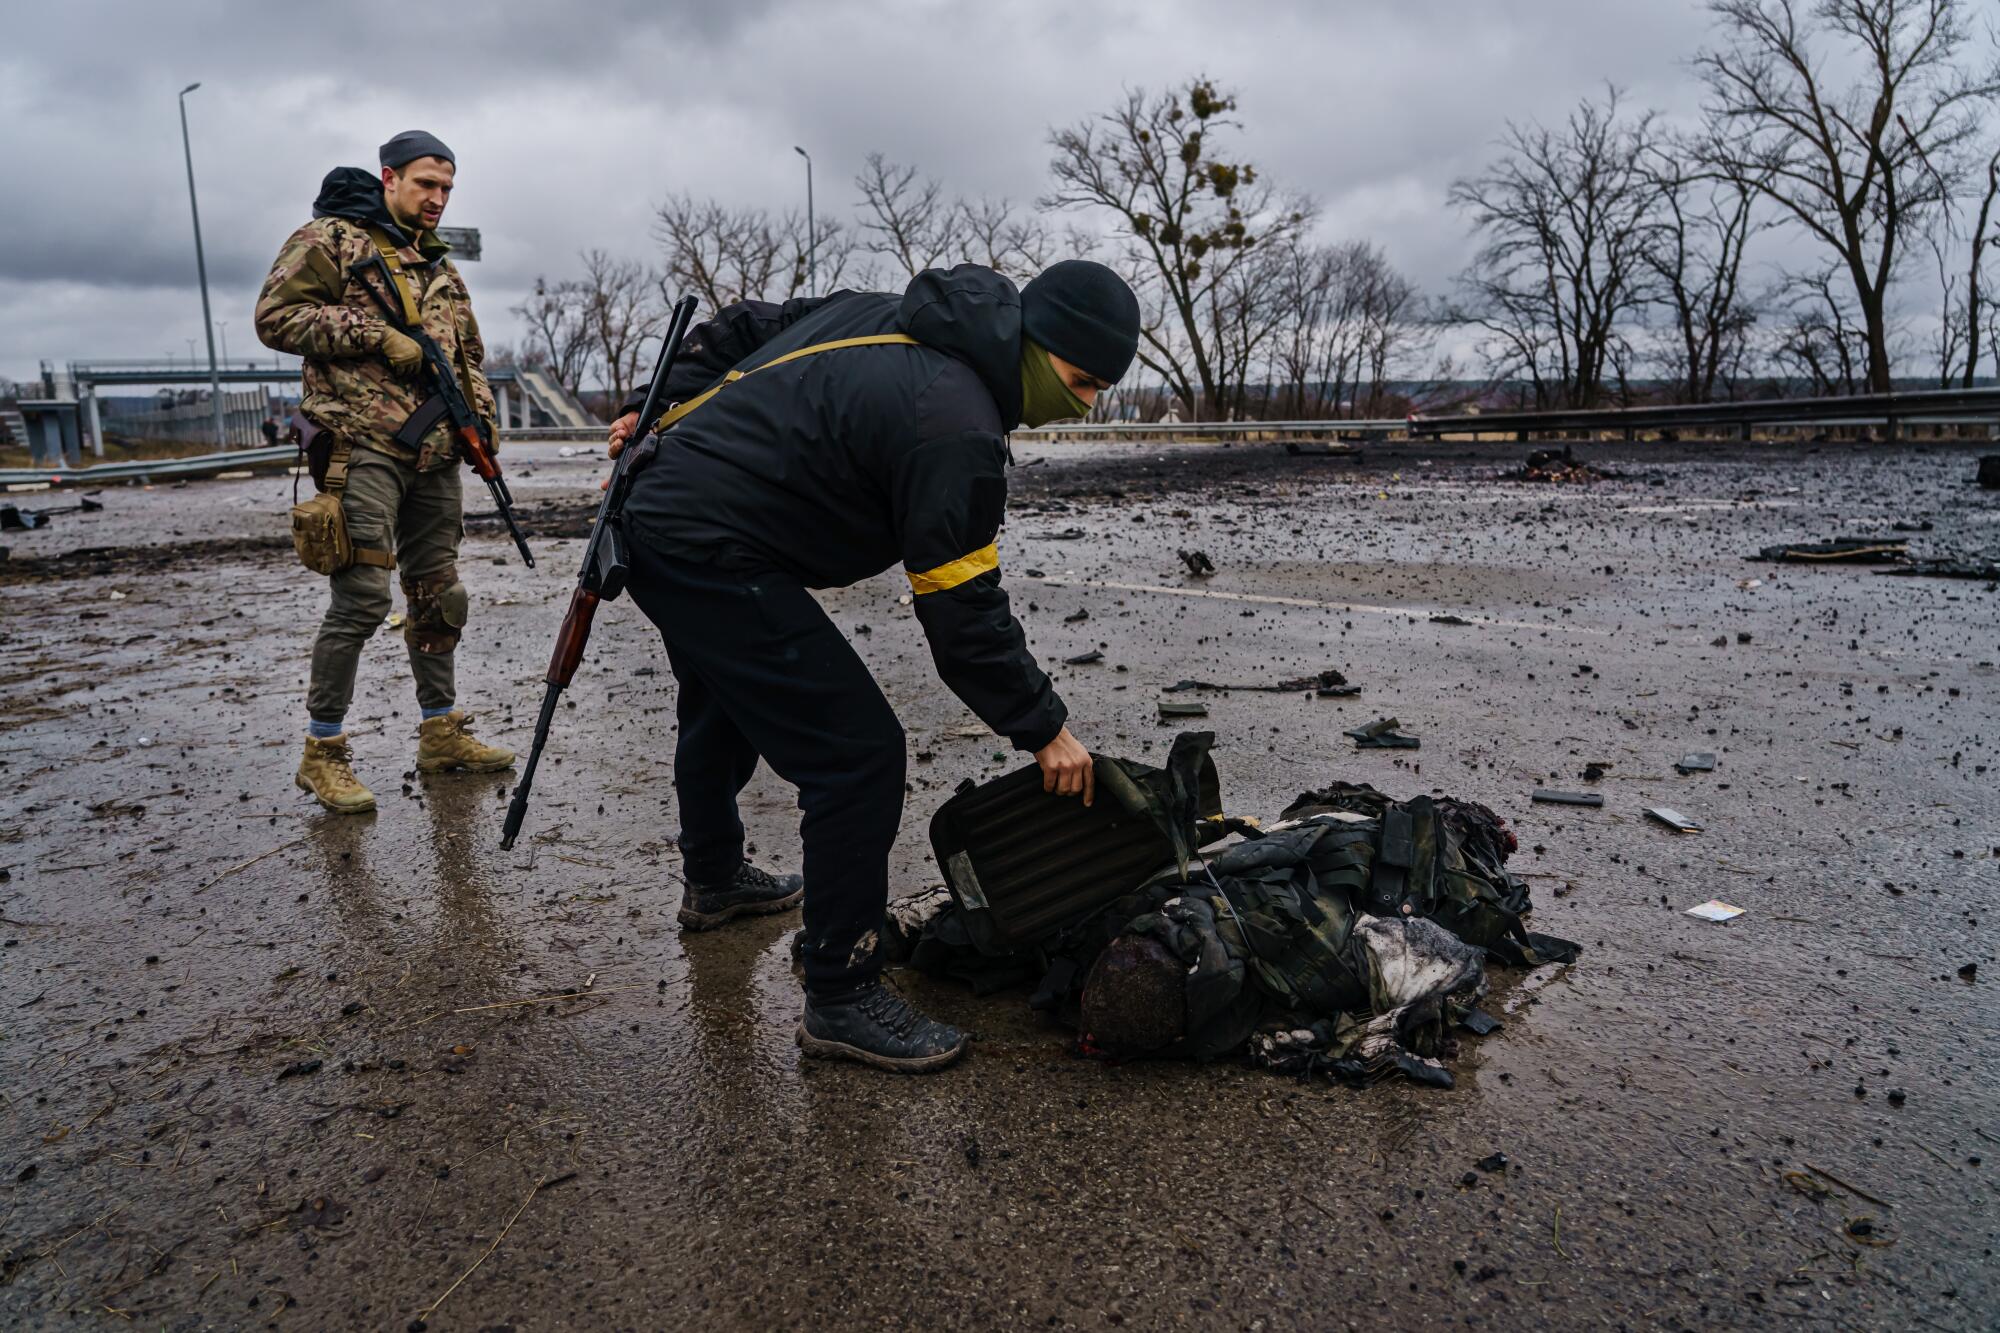 A Ukrainian soldier leans over the body of a Russian soldier while a second Ukrainian stands nearby. 